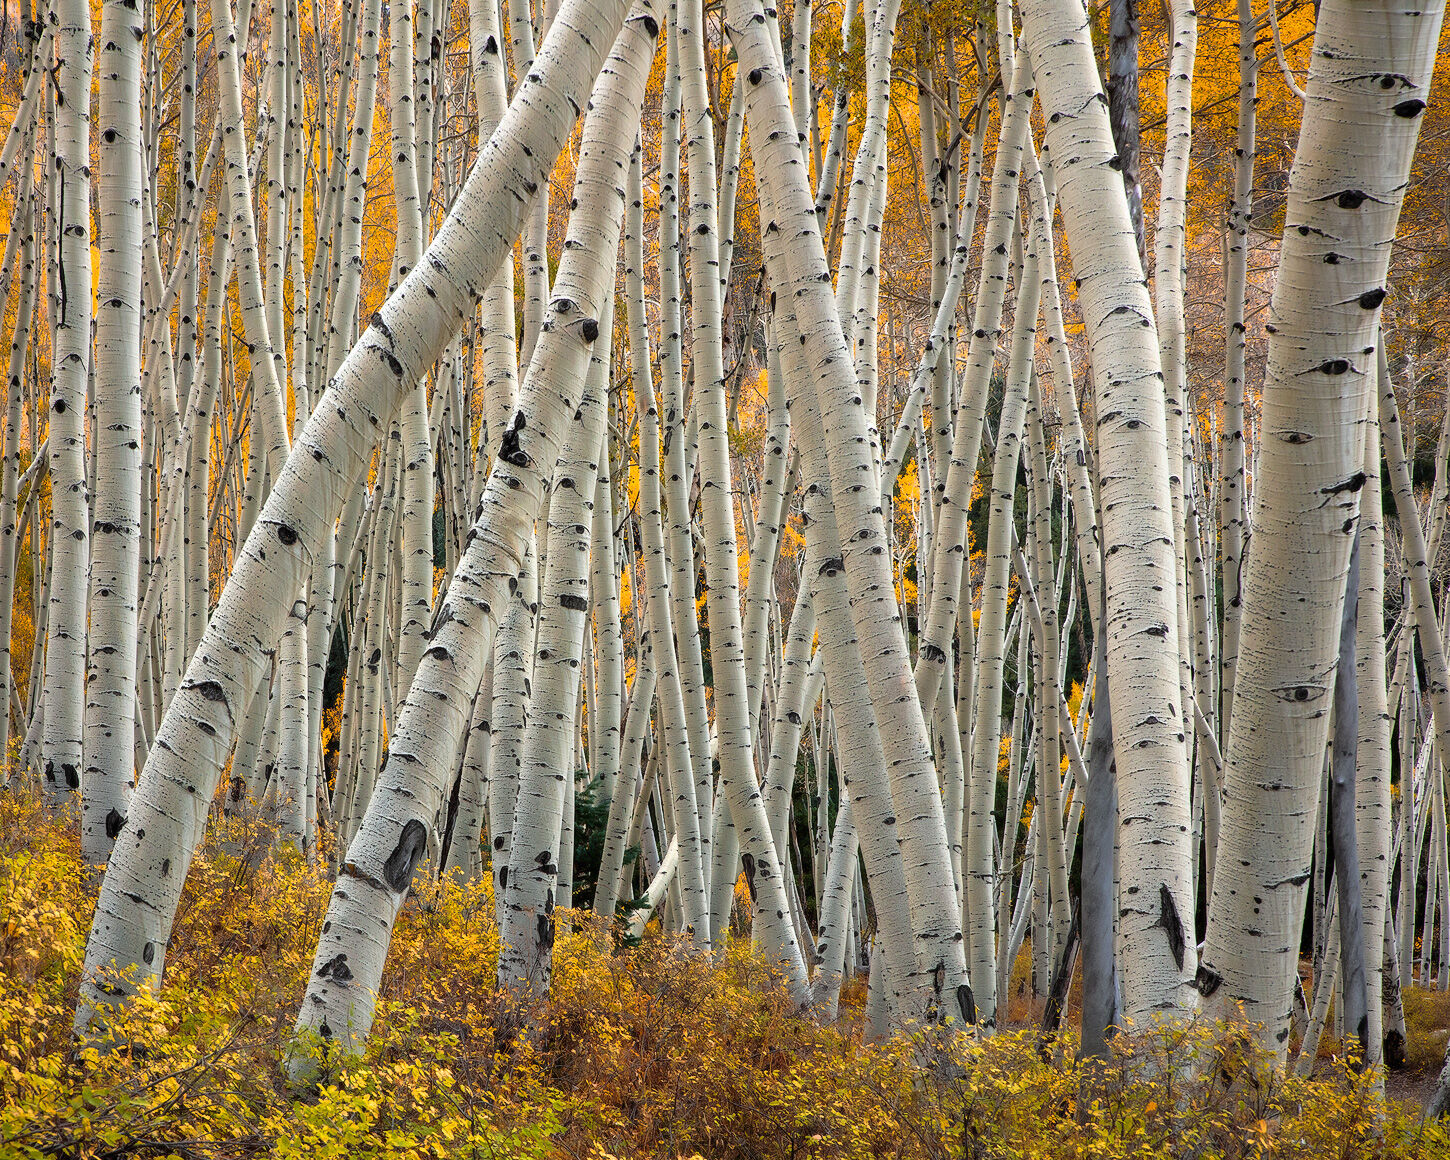 Aspen tree trunks with yellow leaves twist and bend in every direction seeming to be doing gymnastics. 